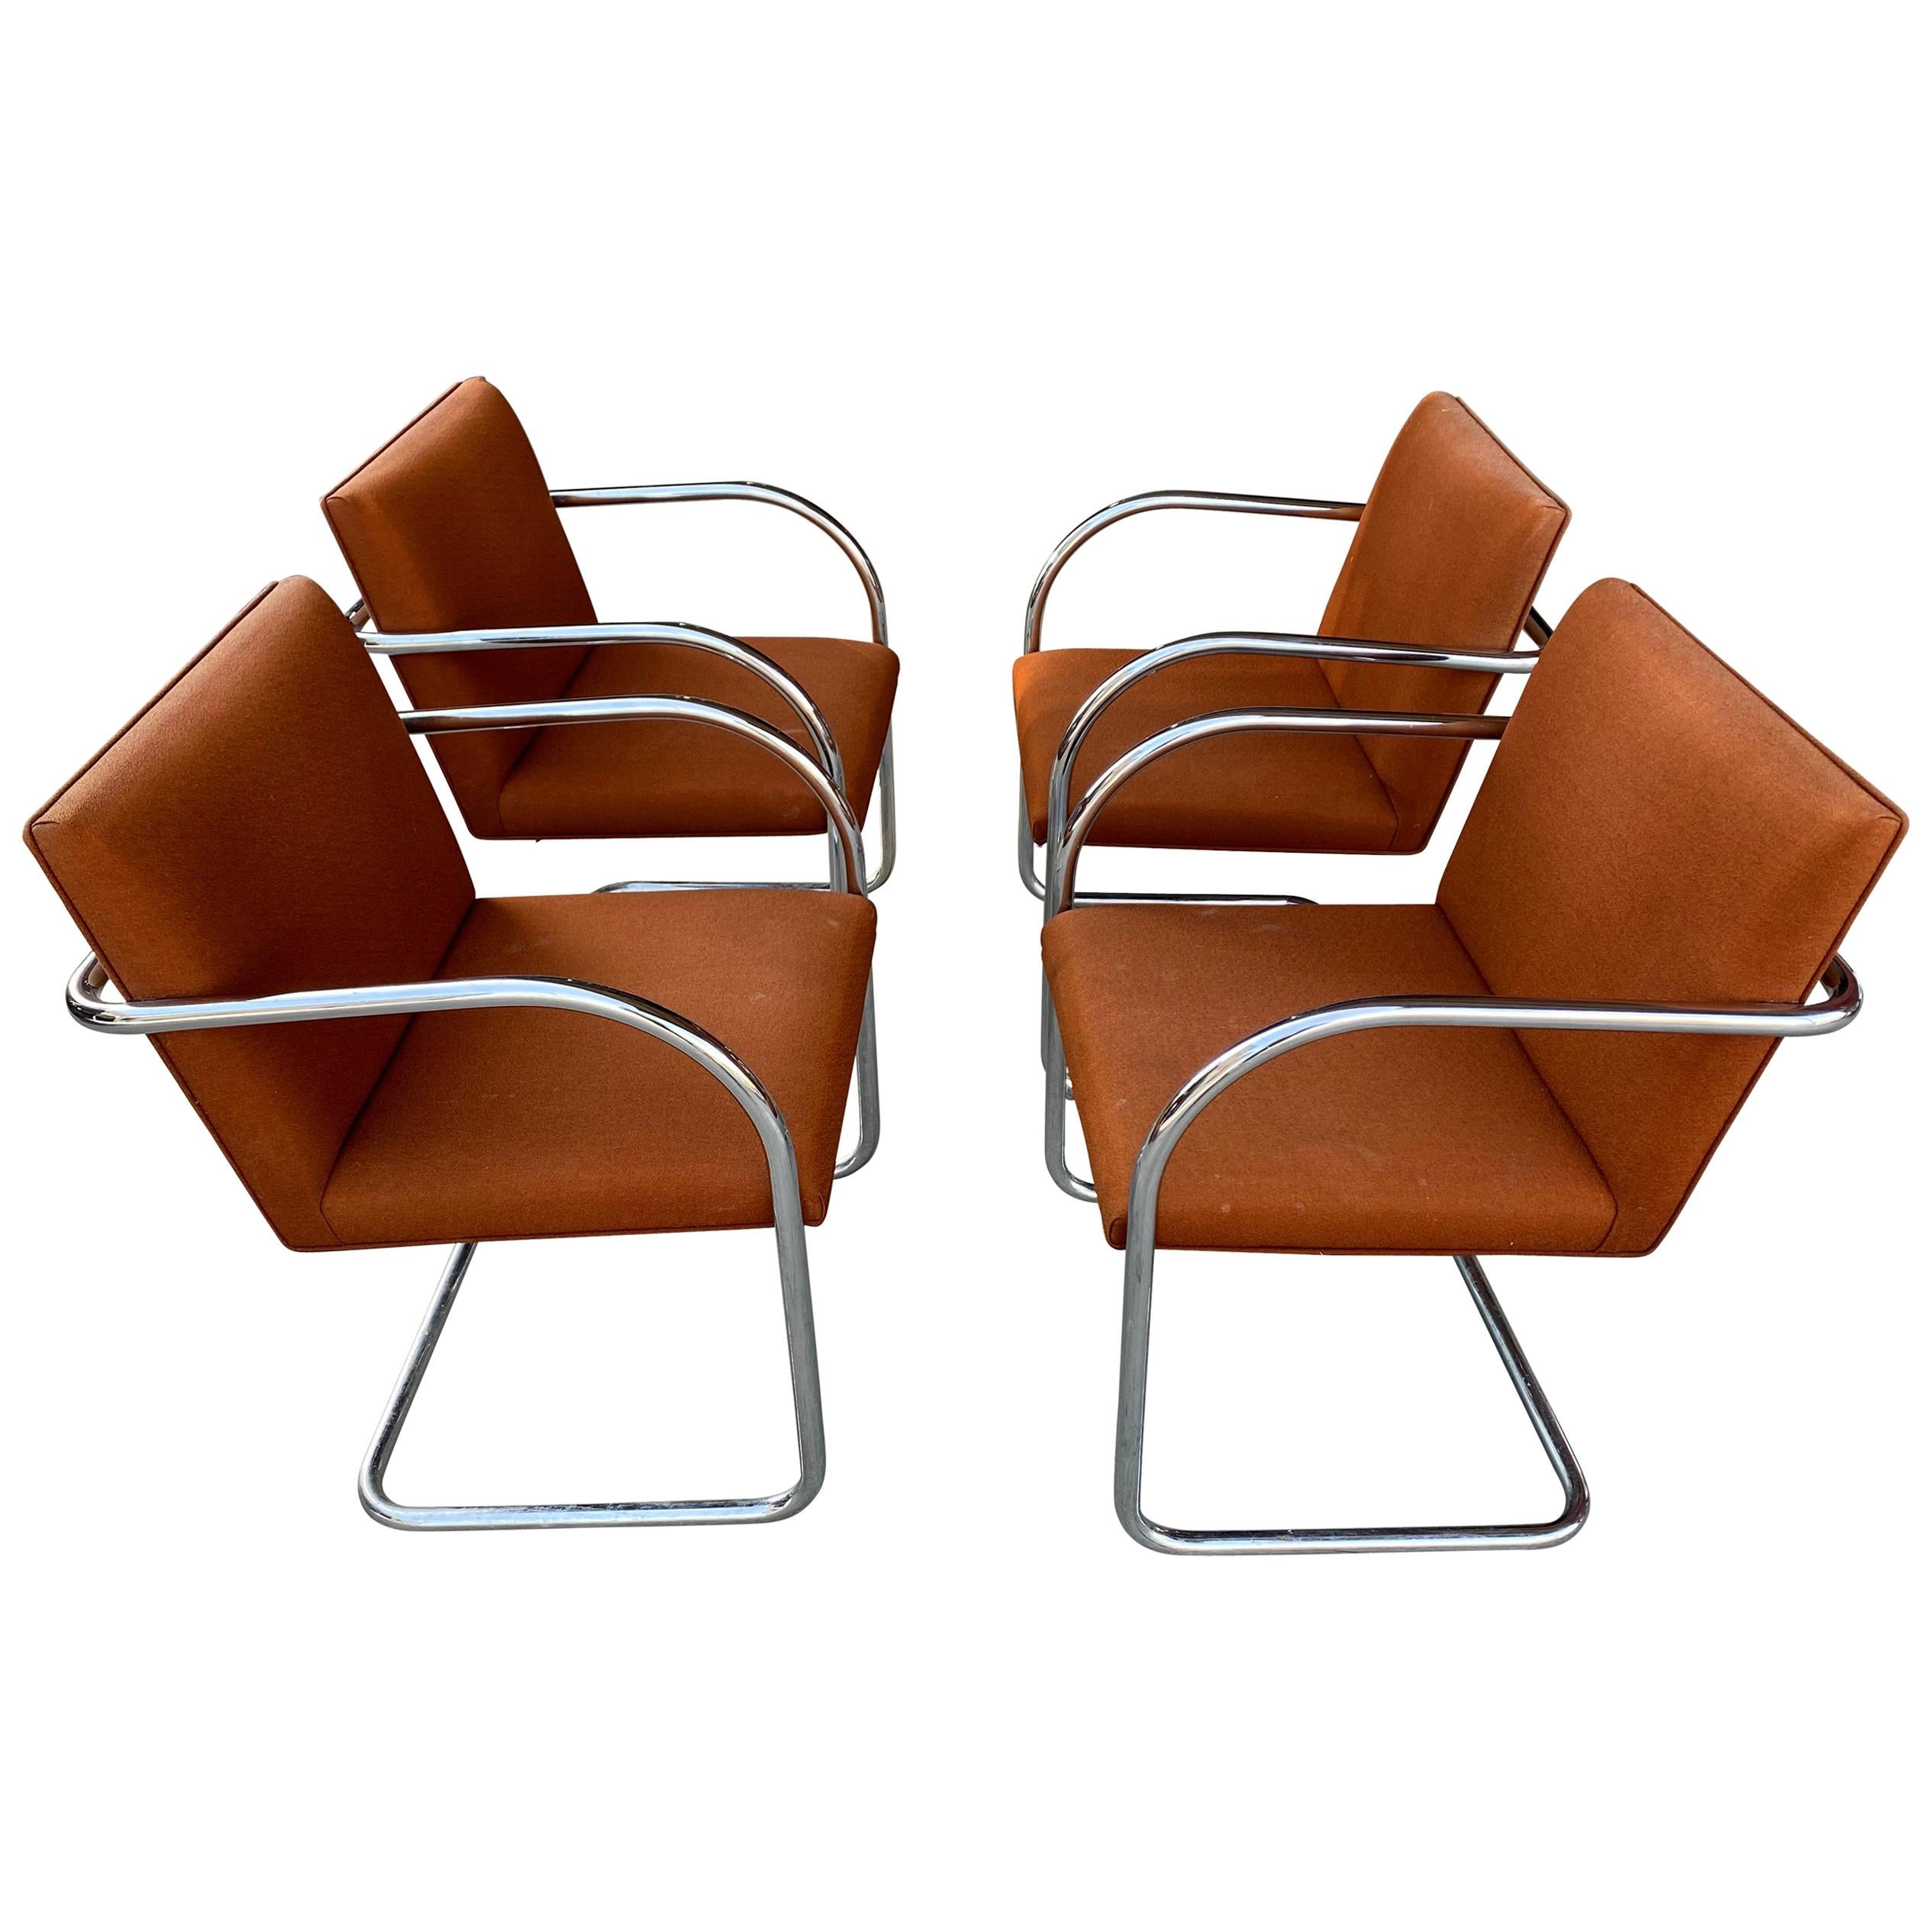 Classic Midcentury Brno Chairs by Mies van der Rohe for Gordon International